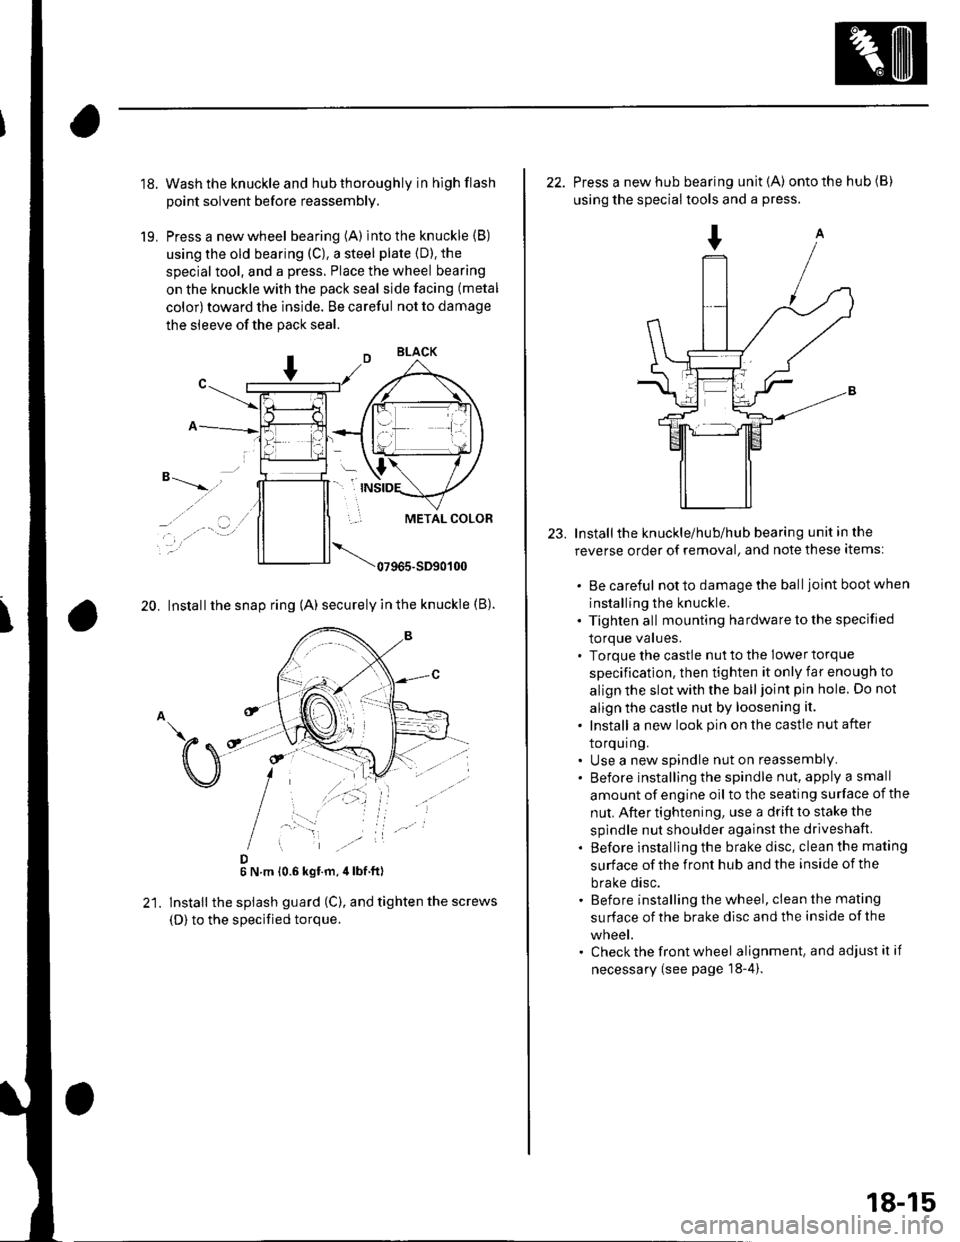 HONDA CIVIC 2002 7.G Service Manual 18.
19.
Wash the knuckle and hub thoroughly in hlgh flash
point solvent before reassembly.
Press a new wheel bearing (A) into the knuckle (B)
using the old bearing (C), a steel plate {D). the
special 